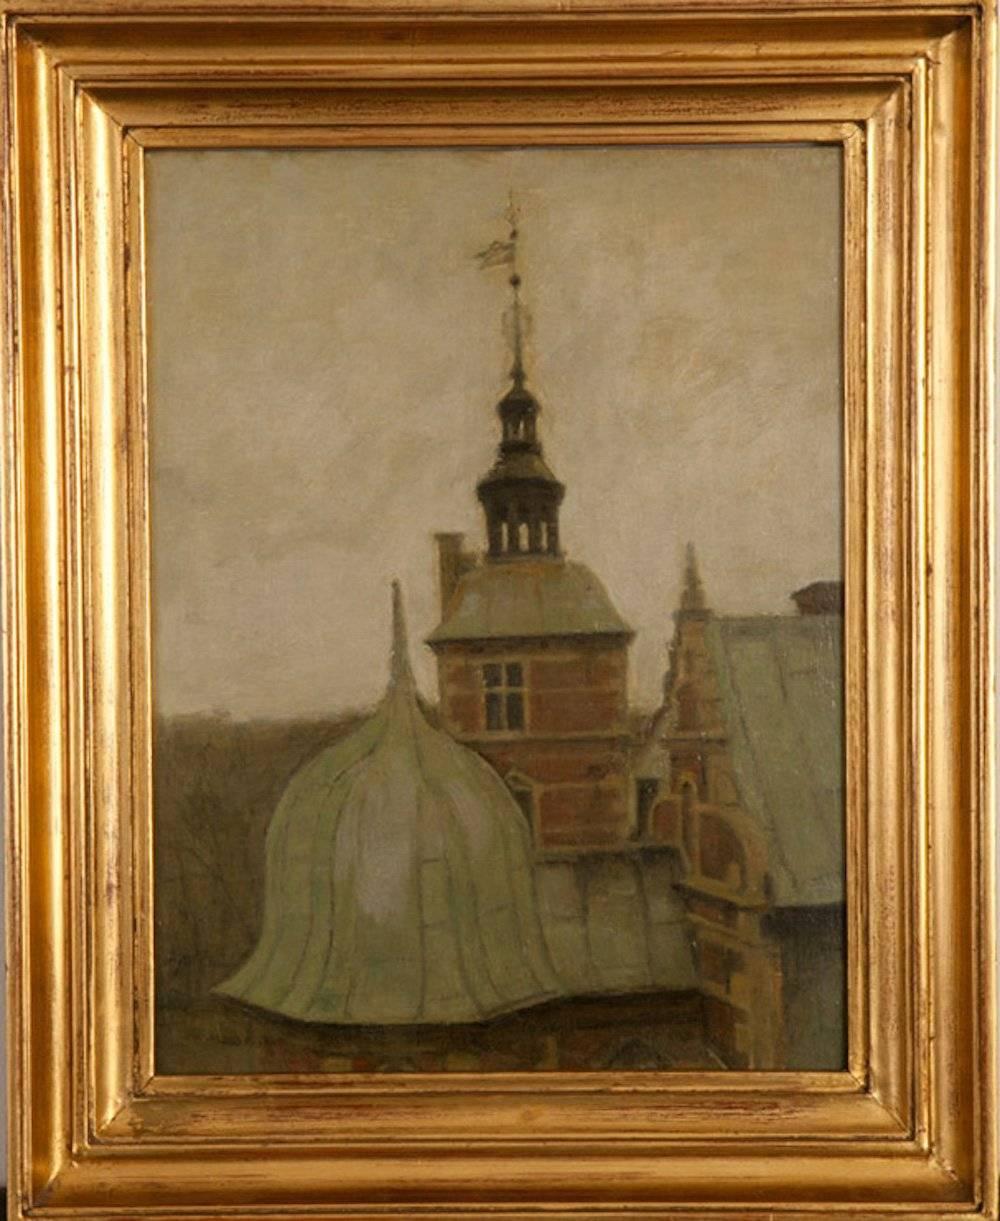 View over the Roof-tops of Frederiksborg Castle, Denmark - Painting by Svend Hammershøi